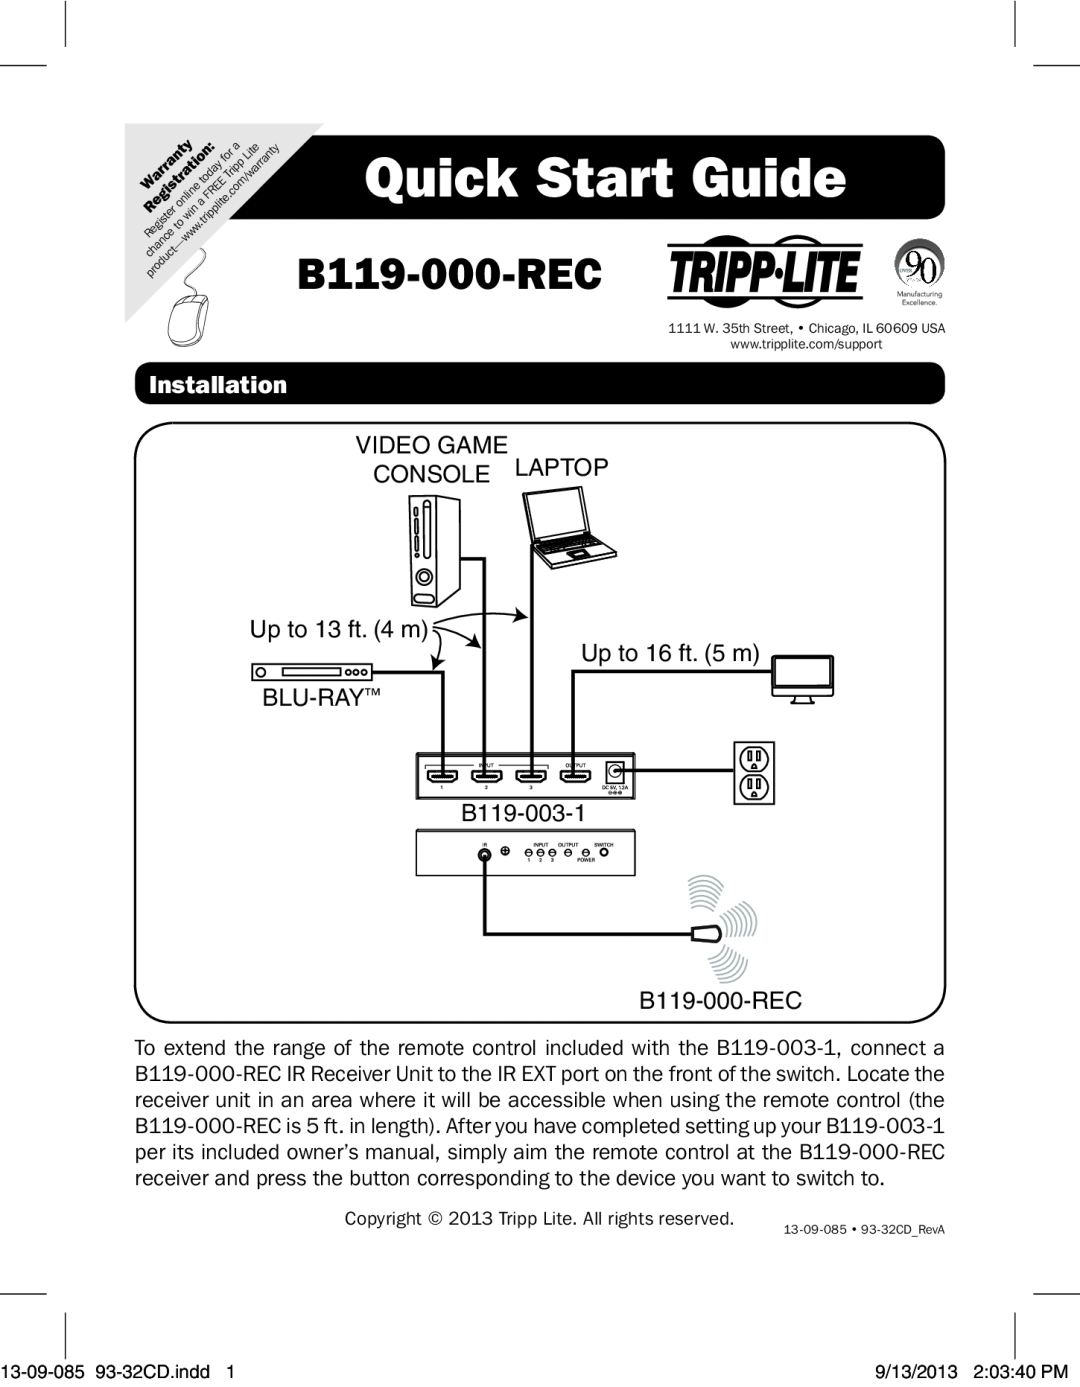 Tripp Lite B119-000-REC quick start Quick Start Guide, Installation, Video Game Console Laptop, Up to 13 ft. 4 m BLU-RAY 